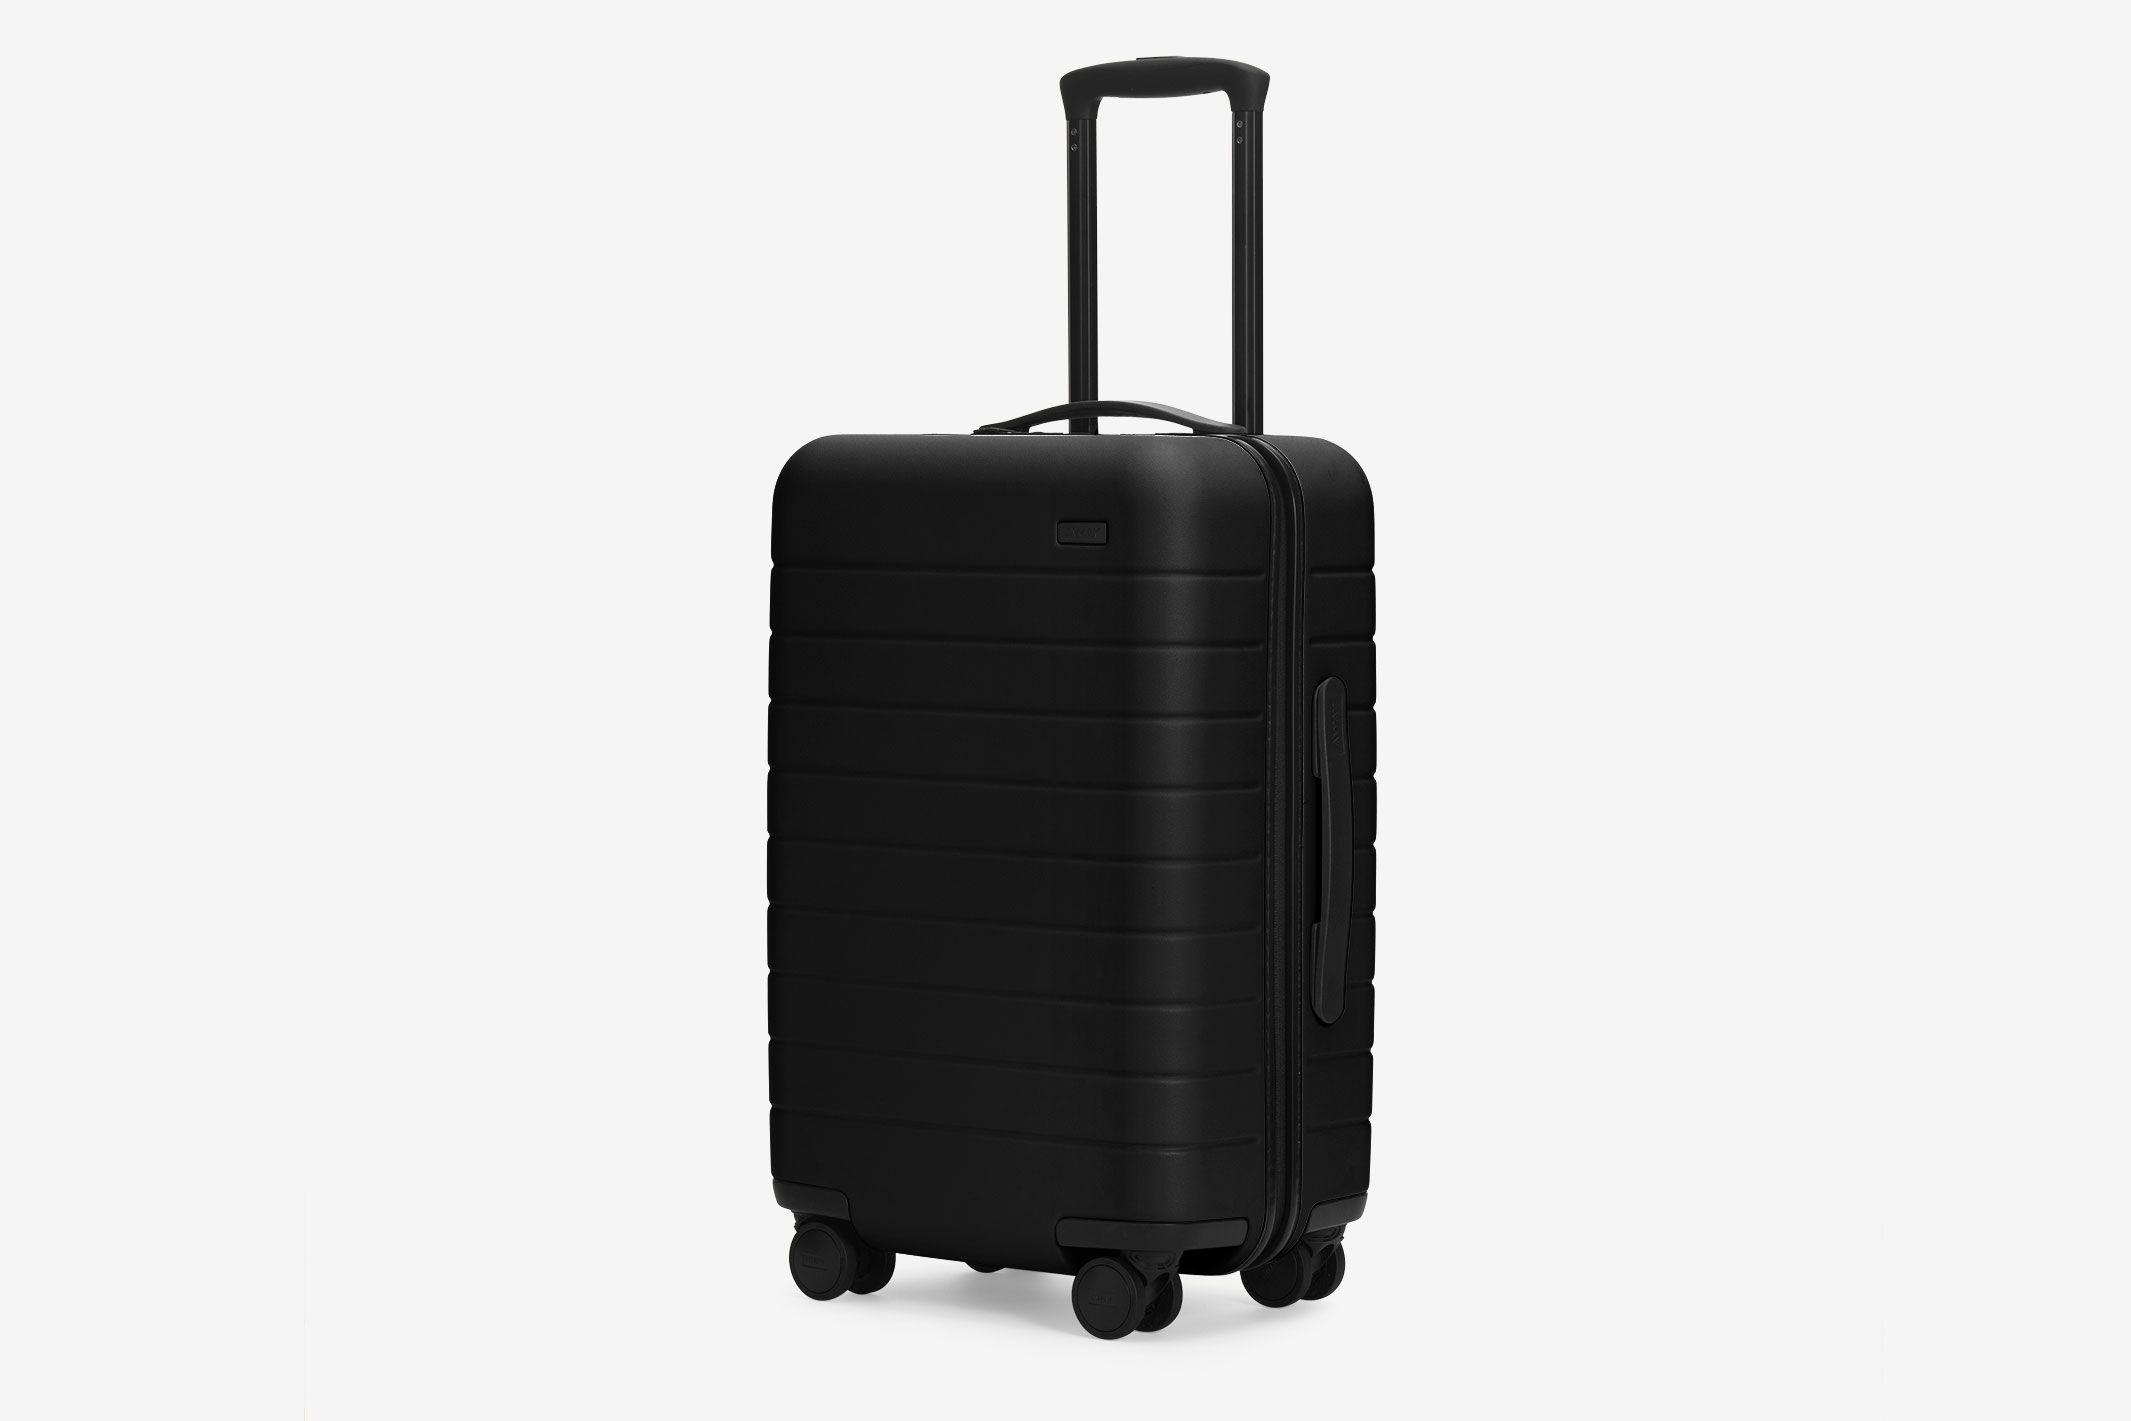 The Best Carry-On Luggage Can Take a Beating